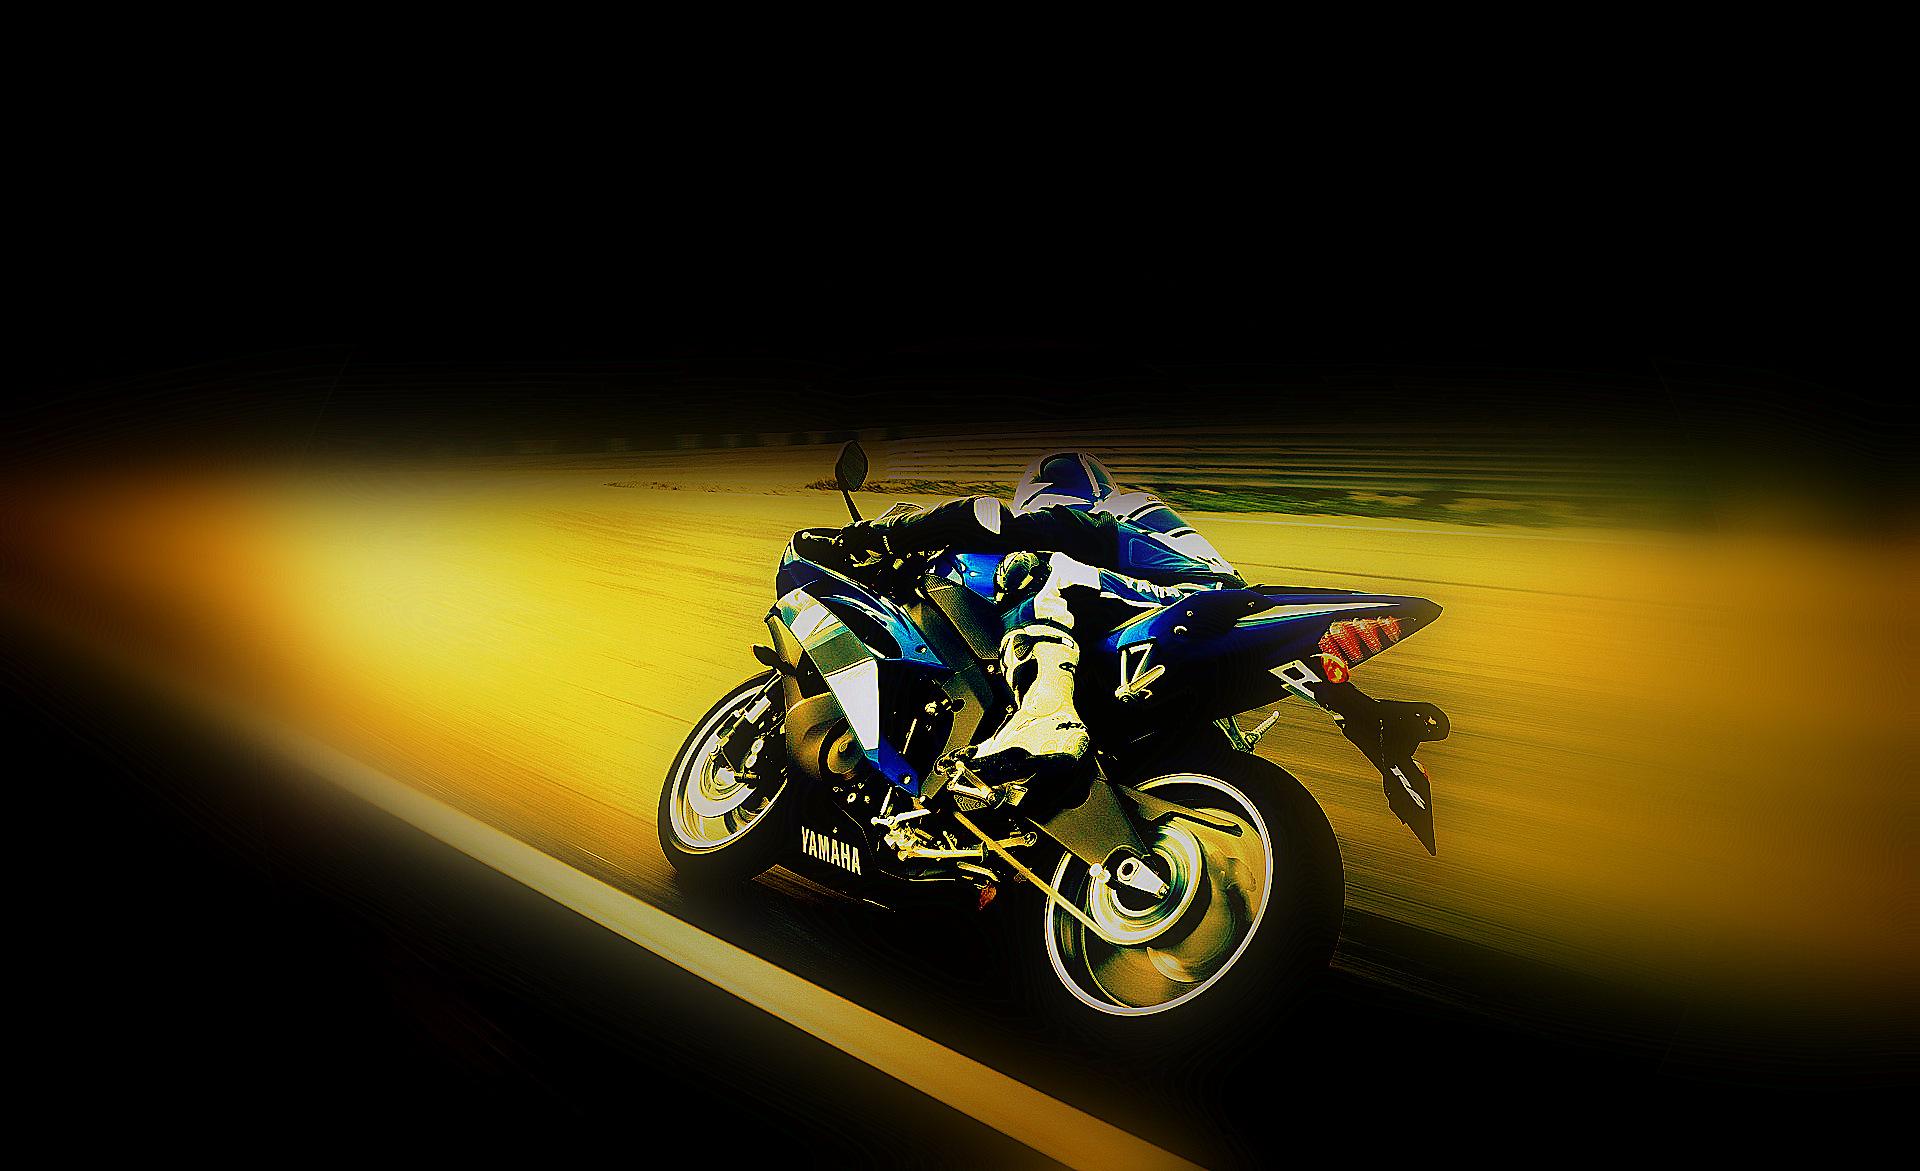 Motorcycle Videos Cool Pictures Most Popular Upload Contact Us